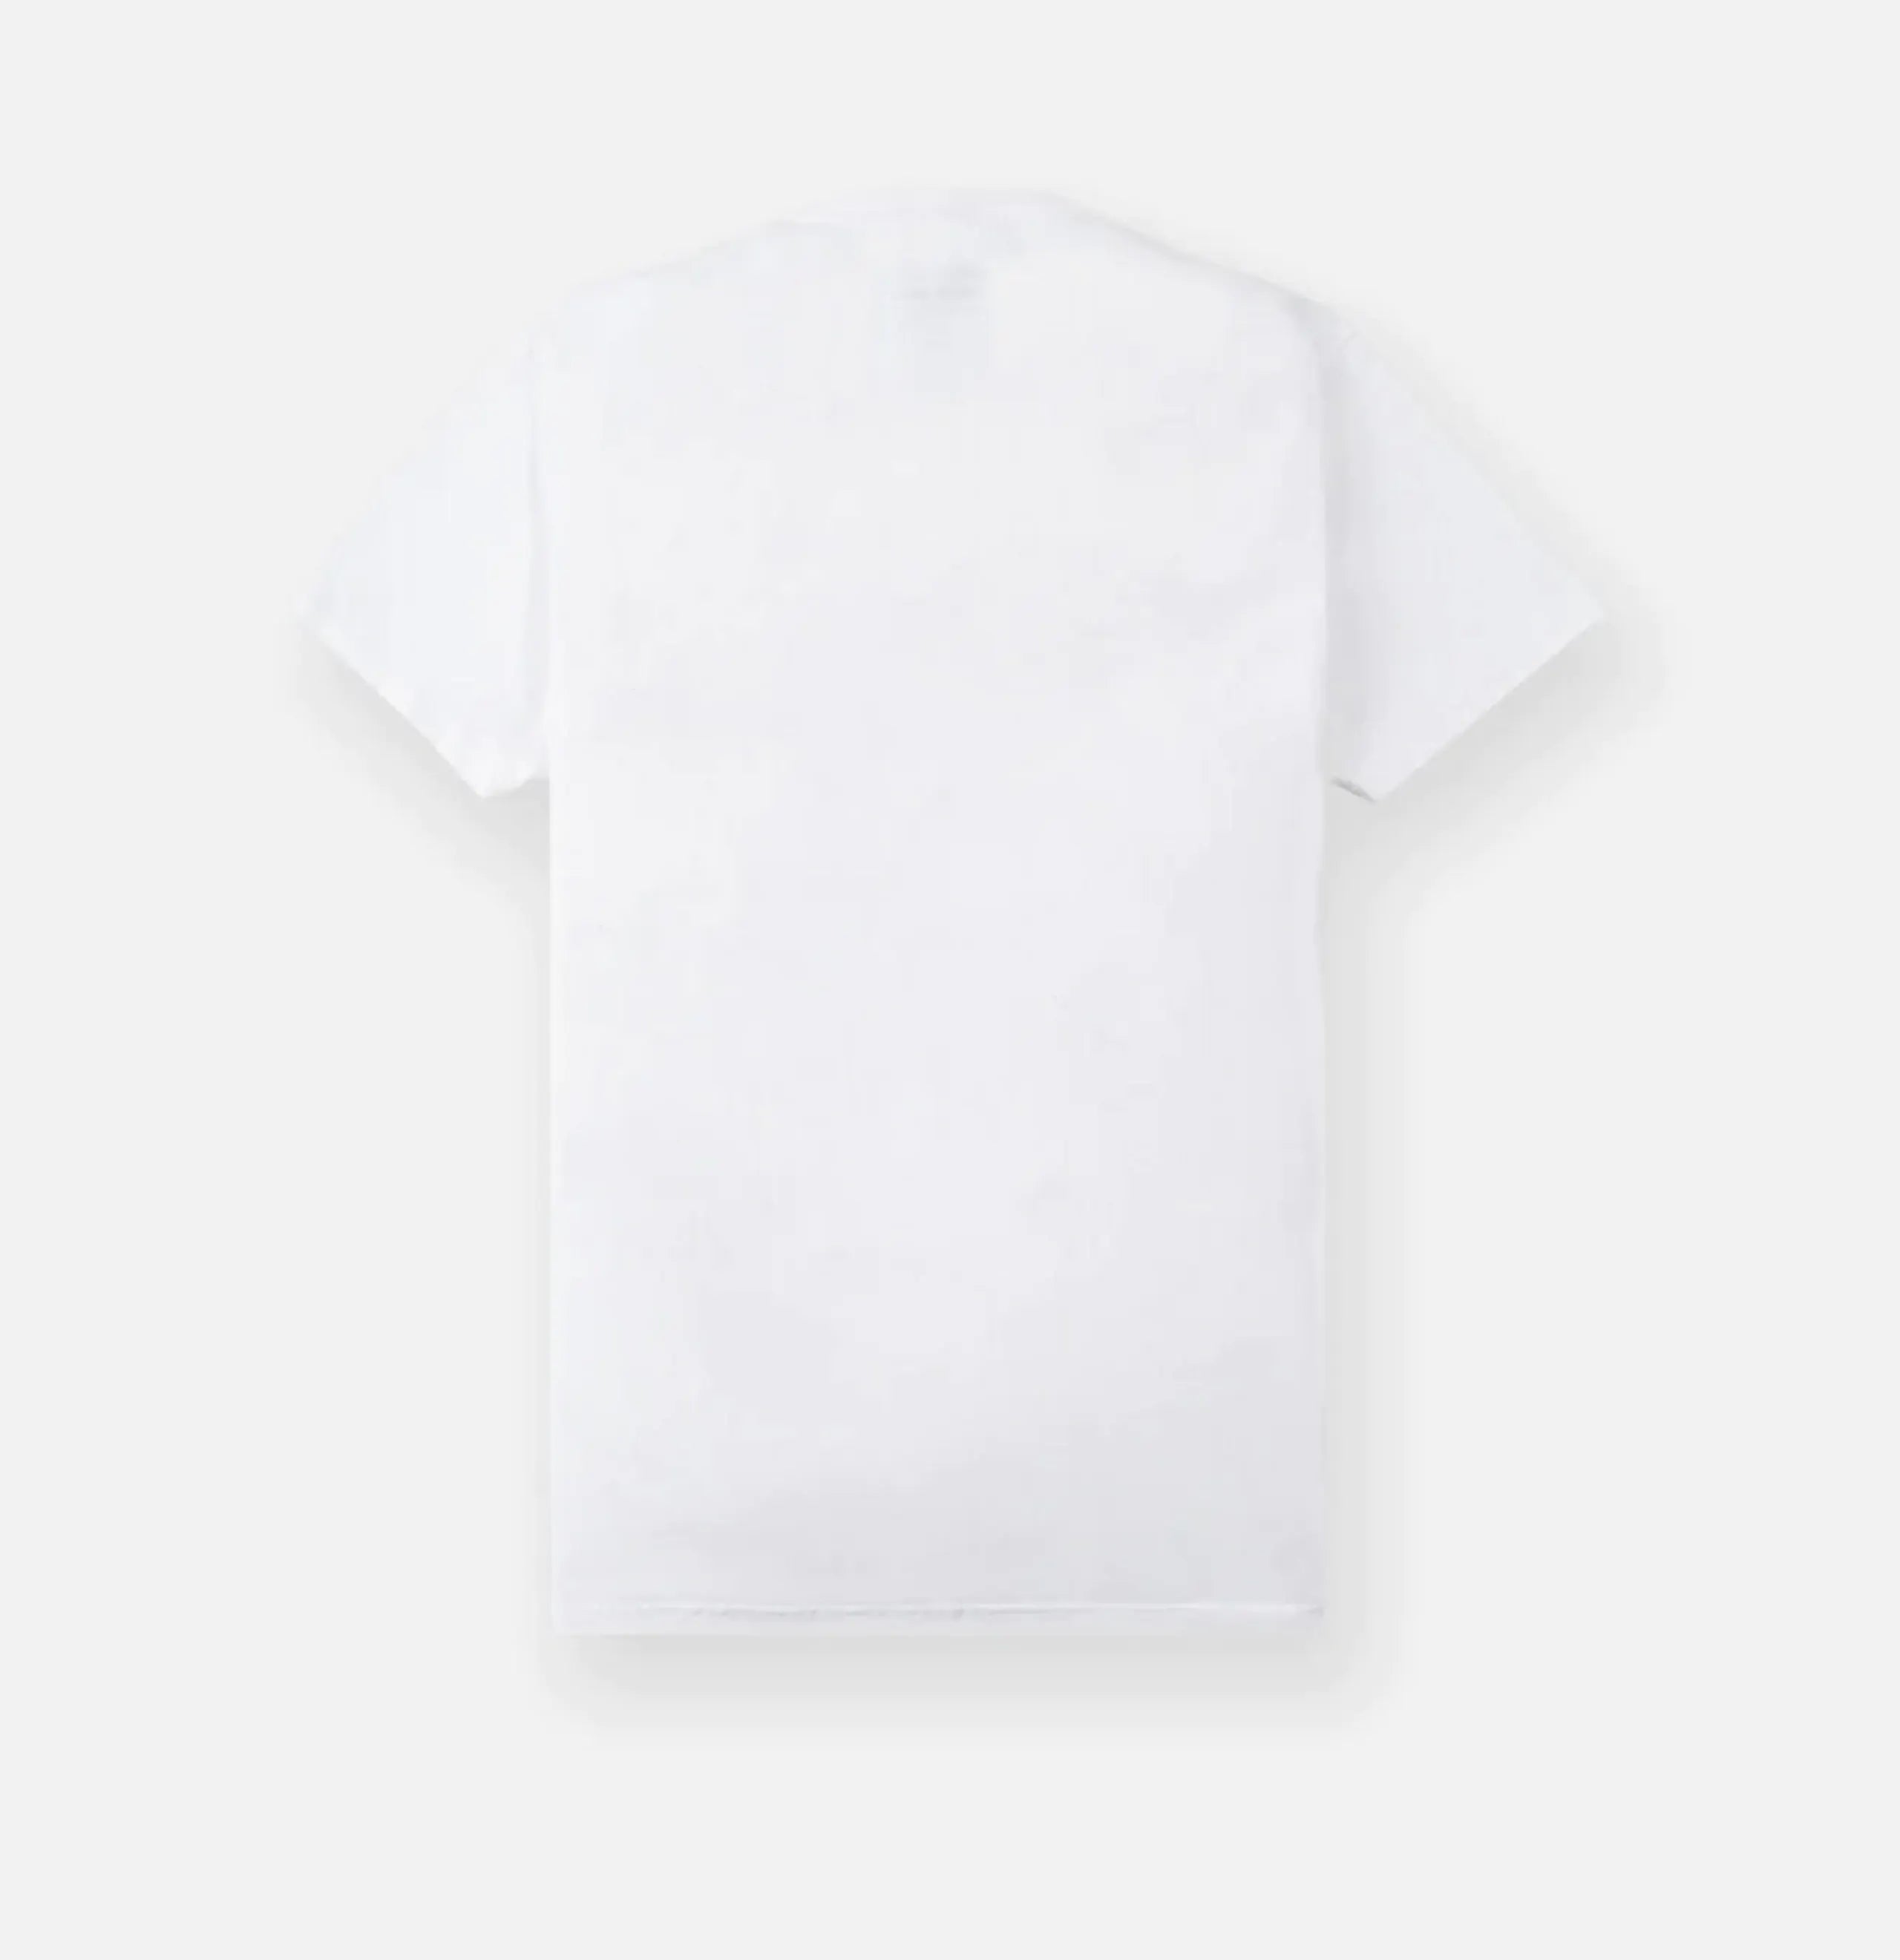 PAPER PLANES PATH TO GREATNESS LOGO TEE